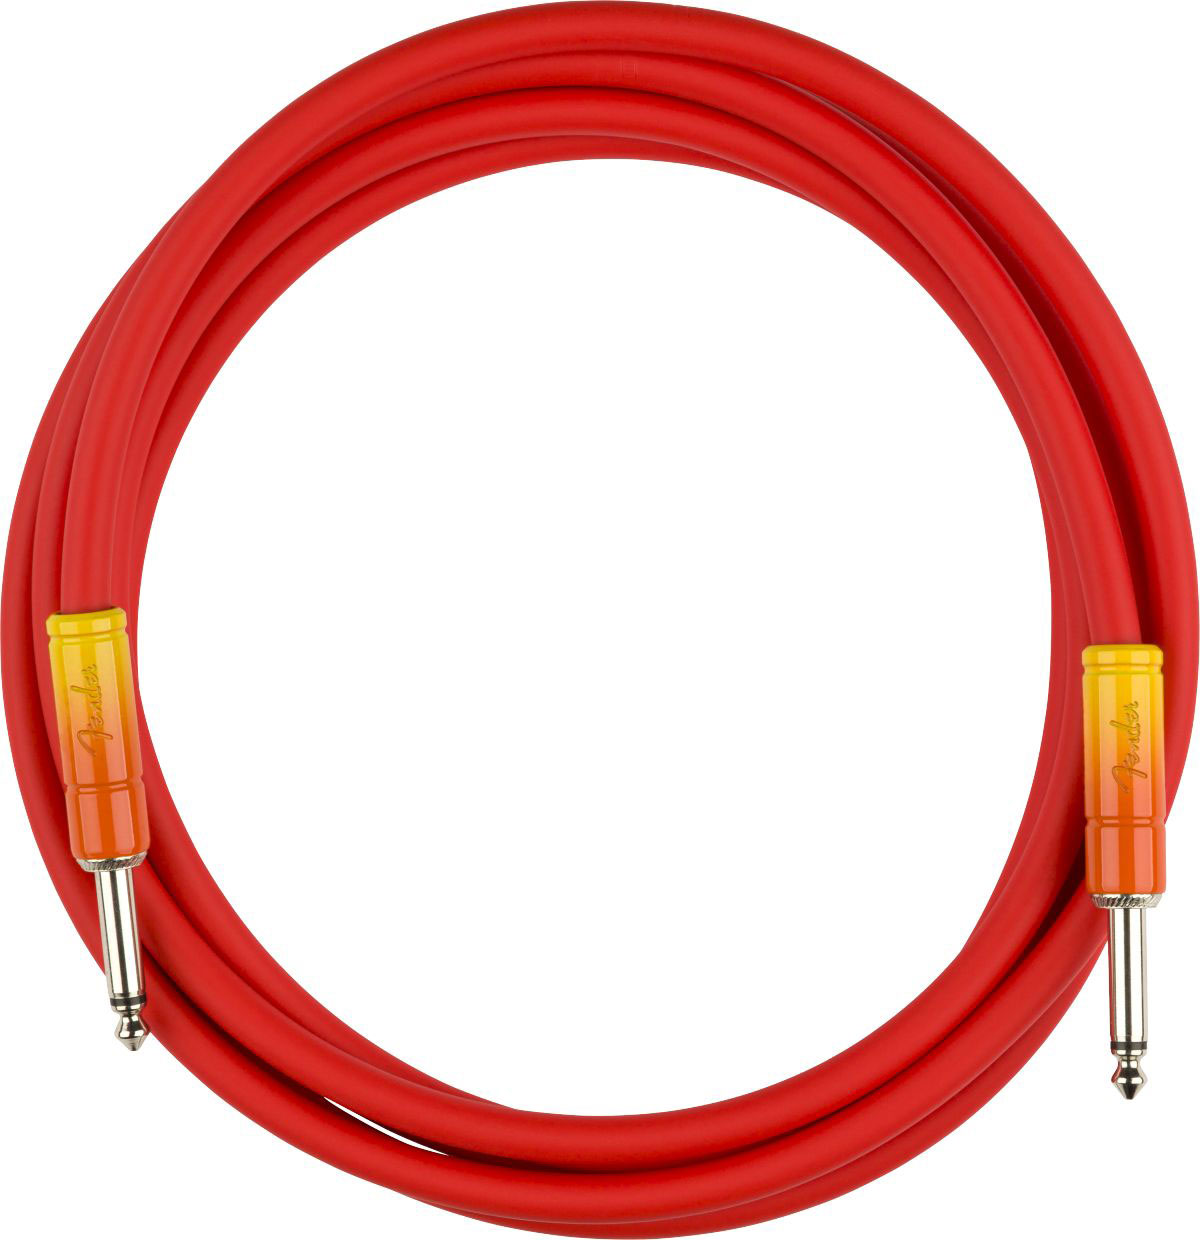 FENDER 10' OMBR CABLE TEQUILA SUNRISE